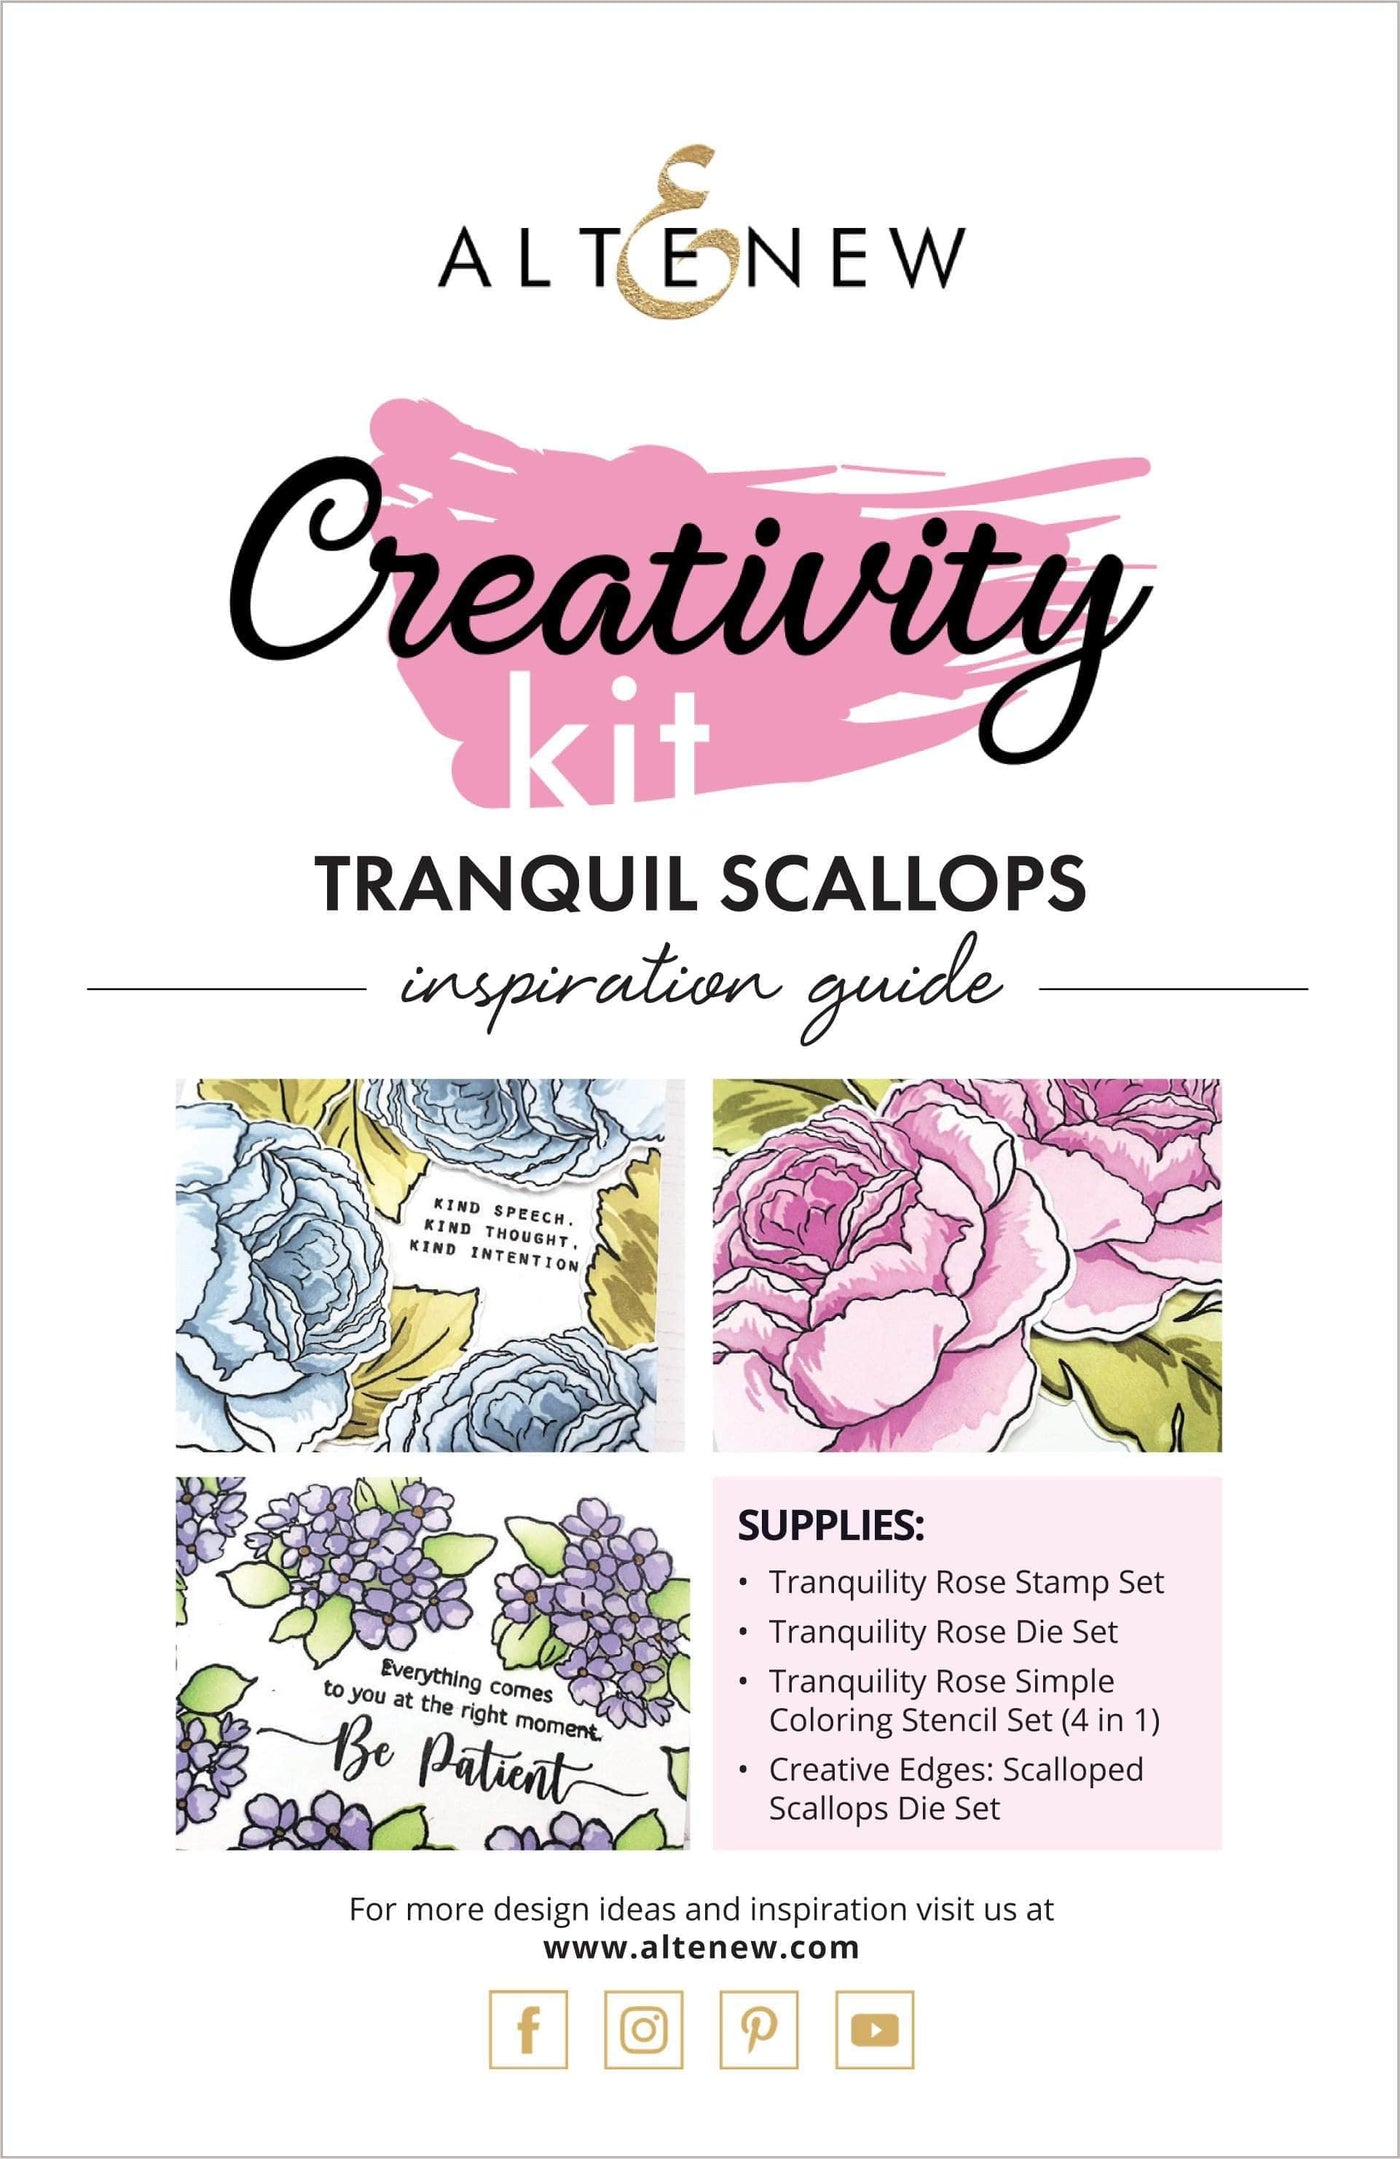 Printed Media Tranquil Scallops Creativity Cardmaking Kit Inspiration Guide